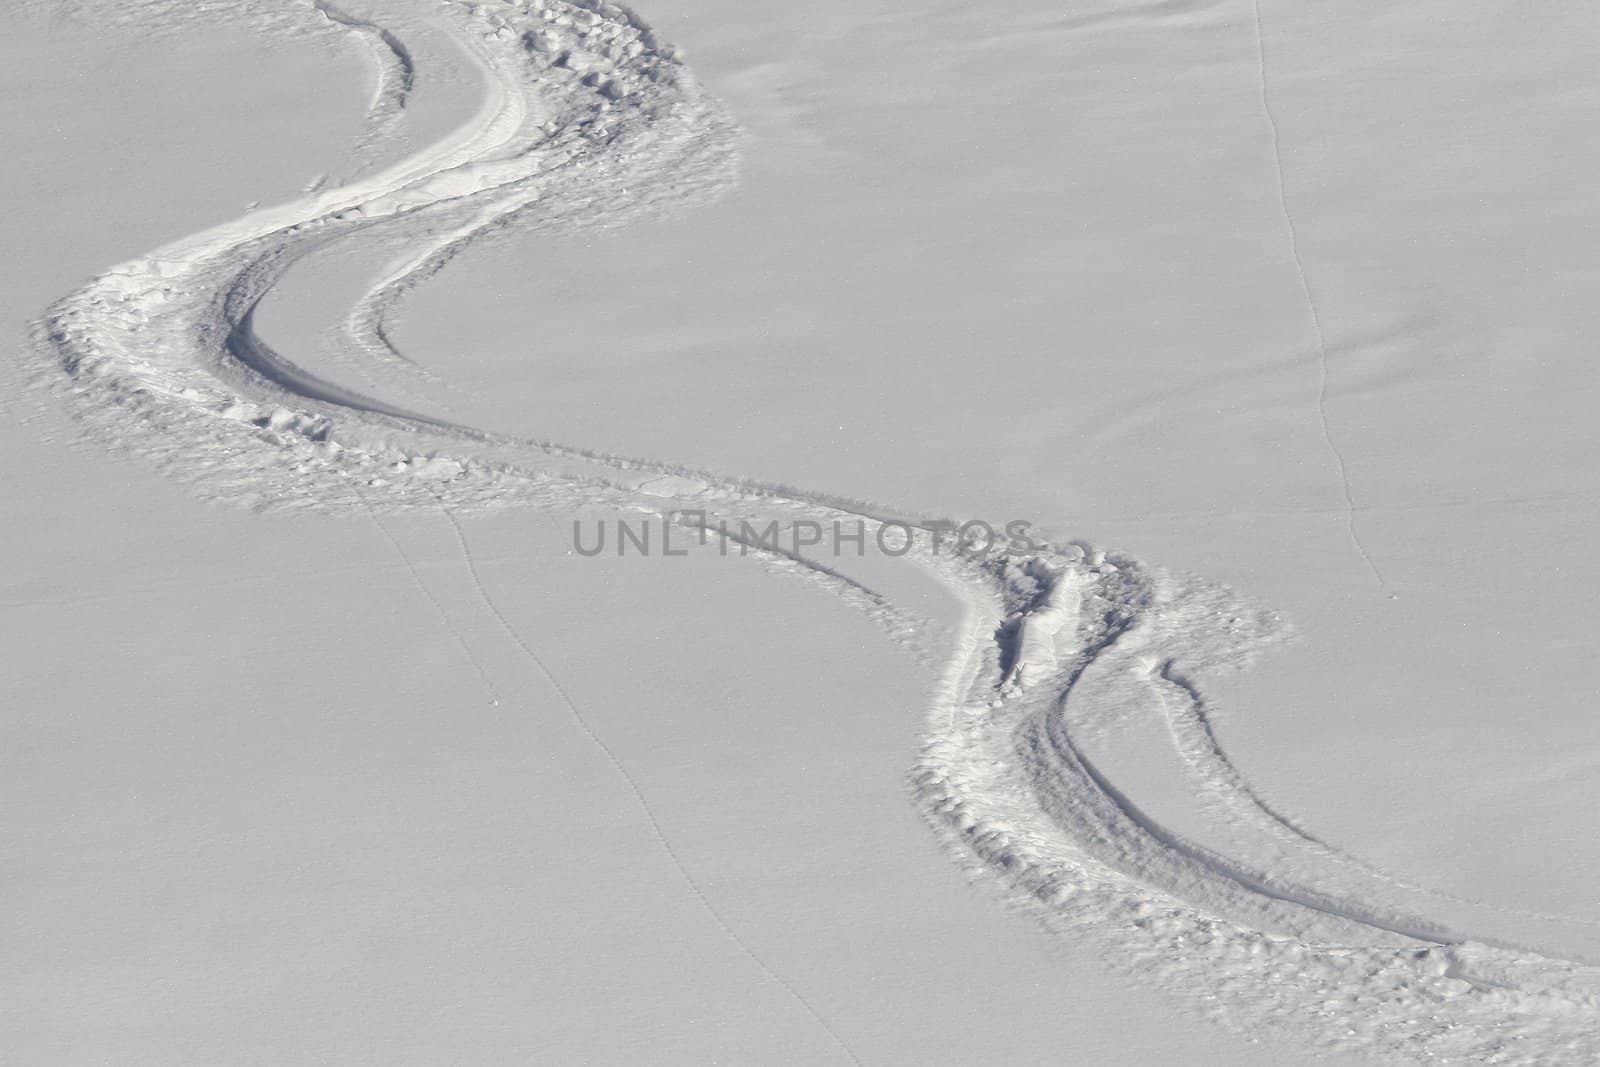 Ski tracks in the snow by monner